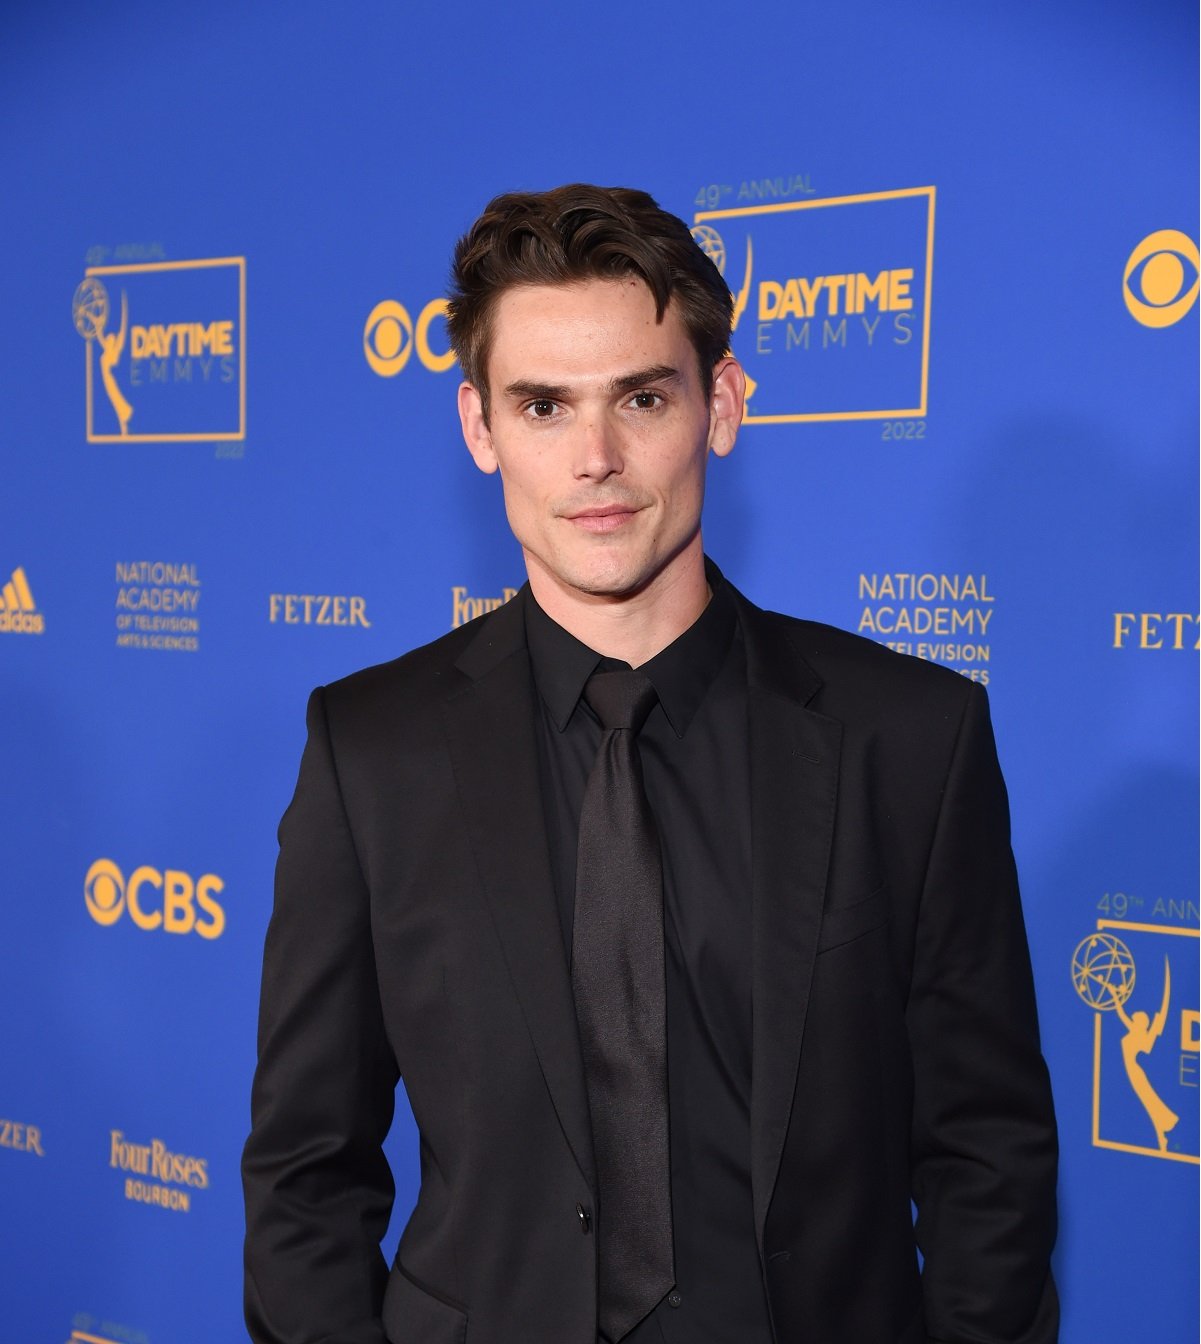 'The Young and the Restless' star Mark Grossman wearing a black suit while posing for a photo on the red carpet.